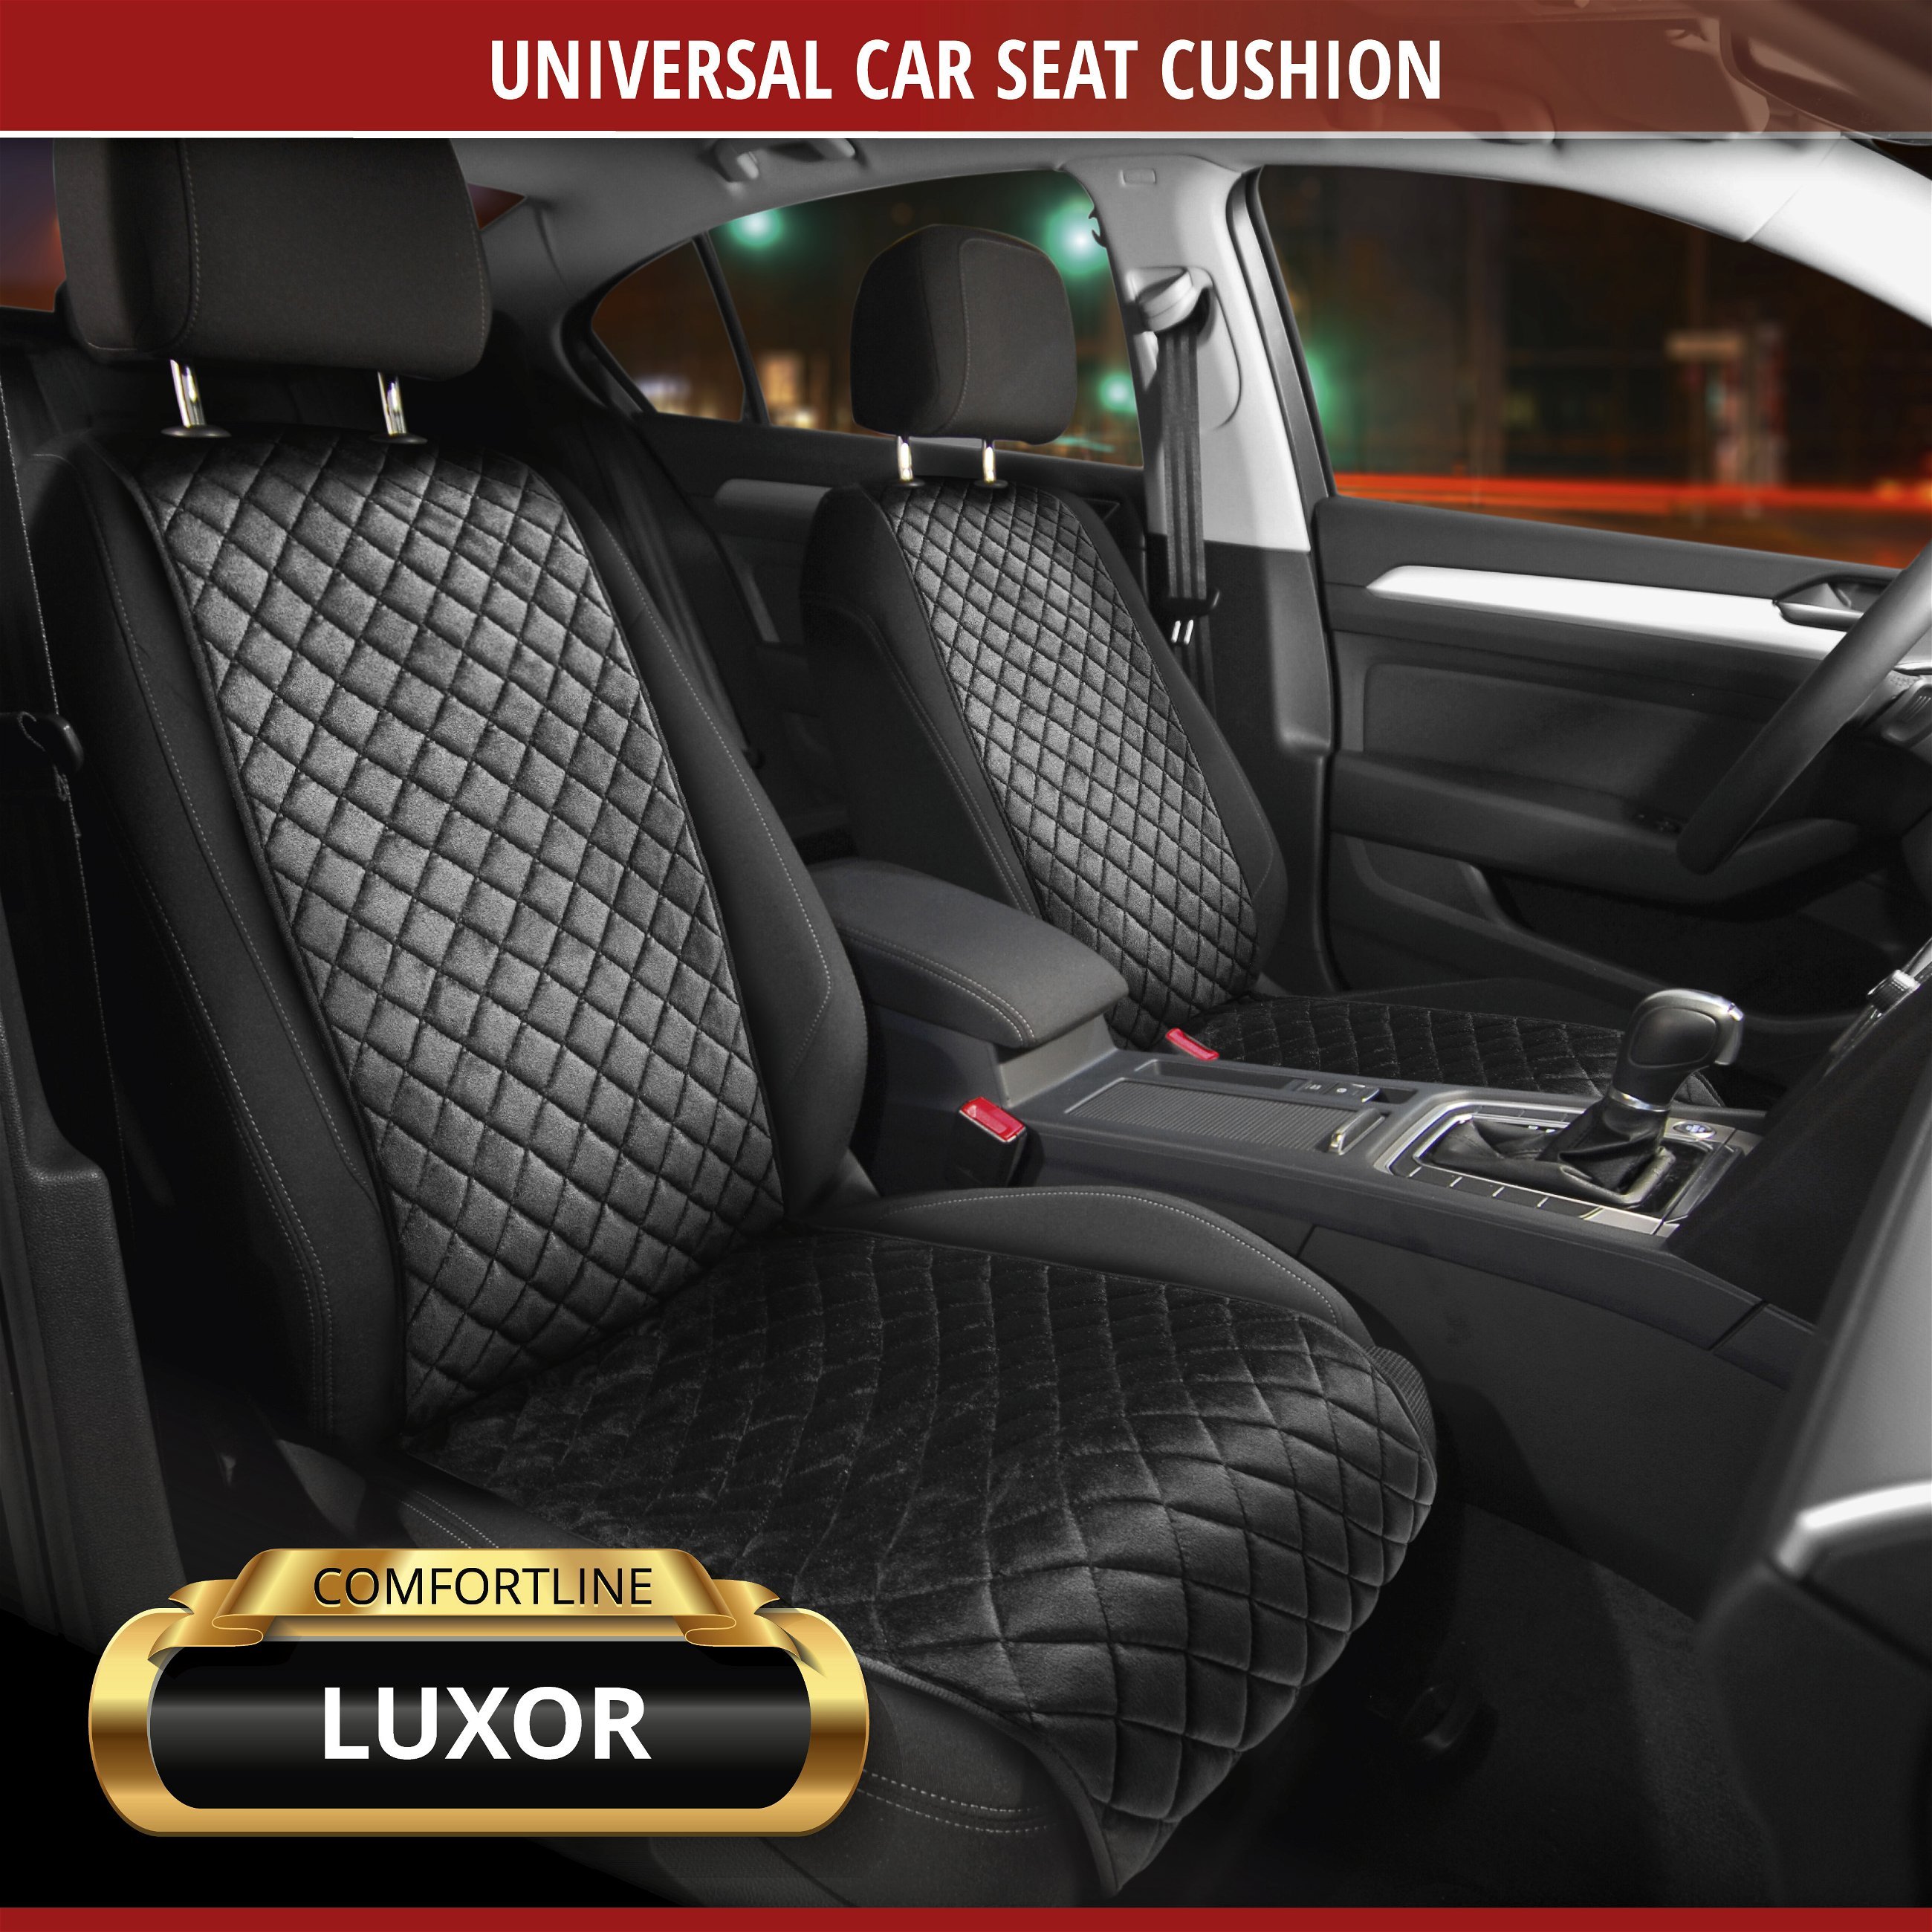 Seat cover Comfortline Luxor with anti-slip coating, 1 front seat